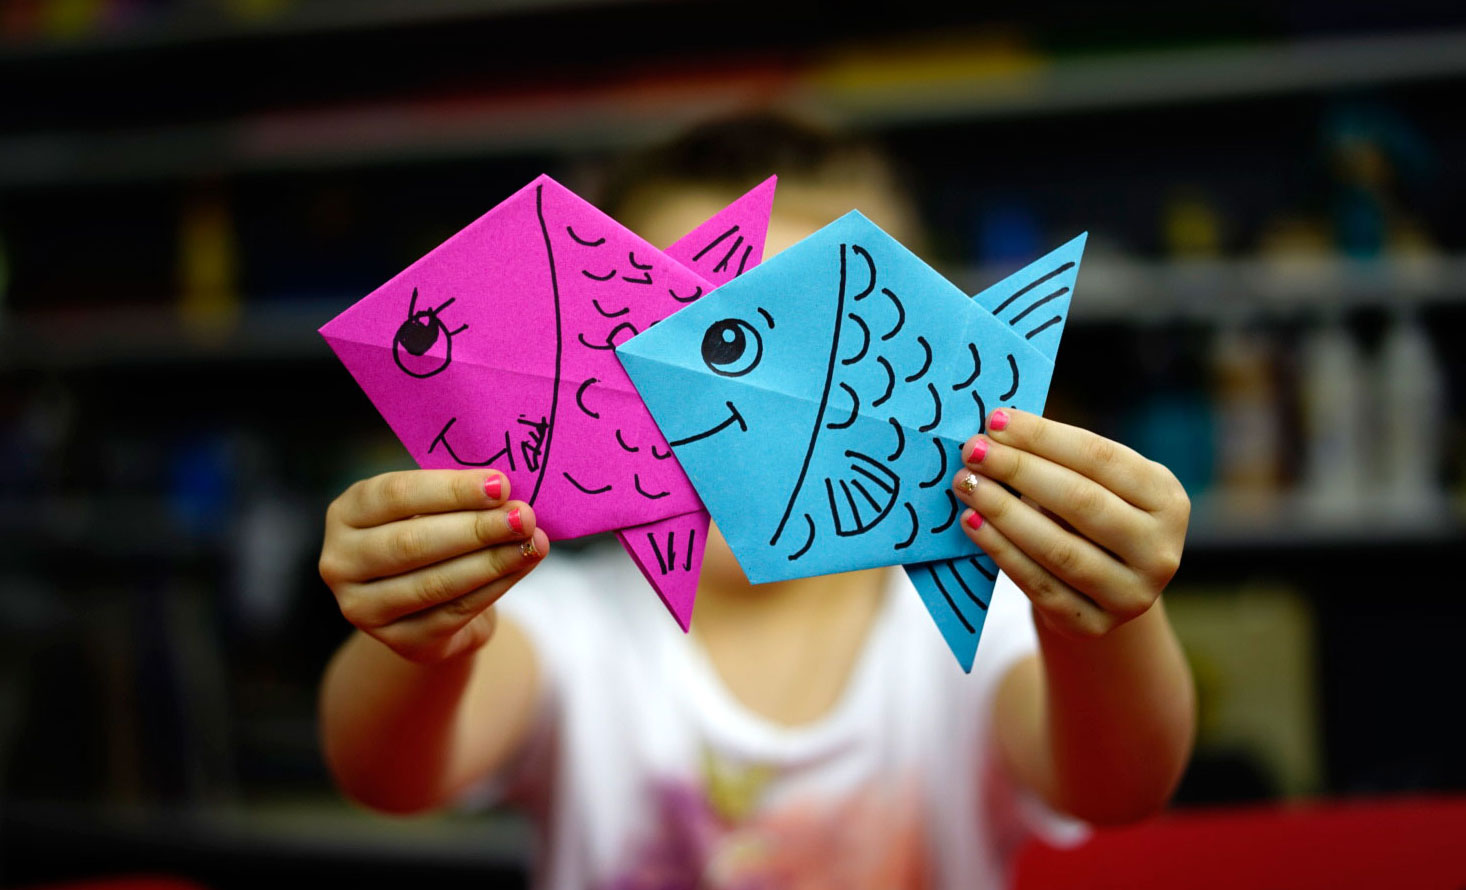 How to Make Easy Origami Paper Fish